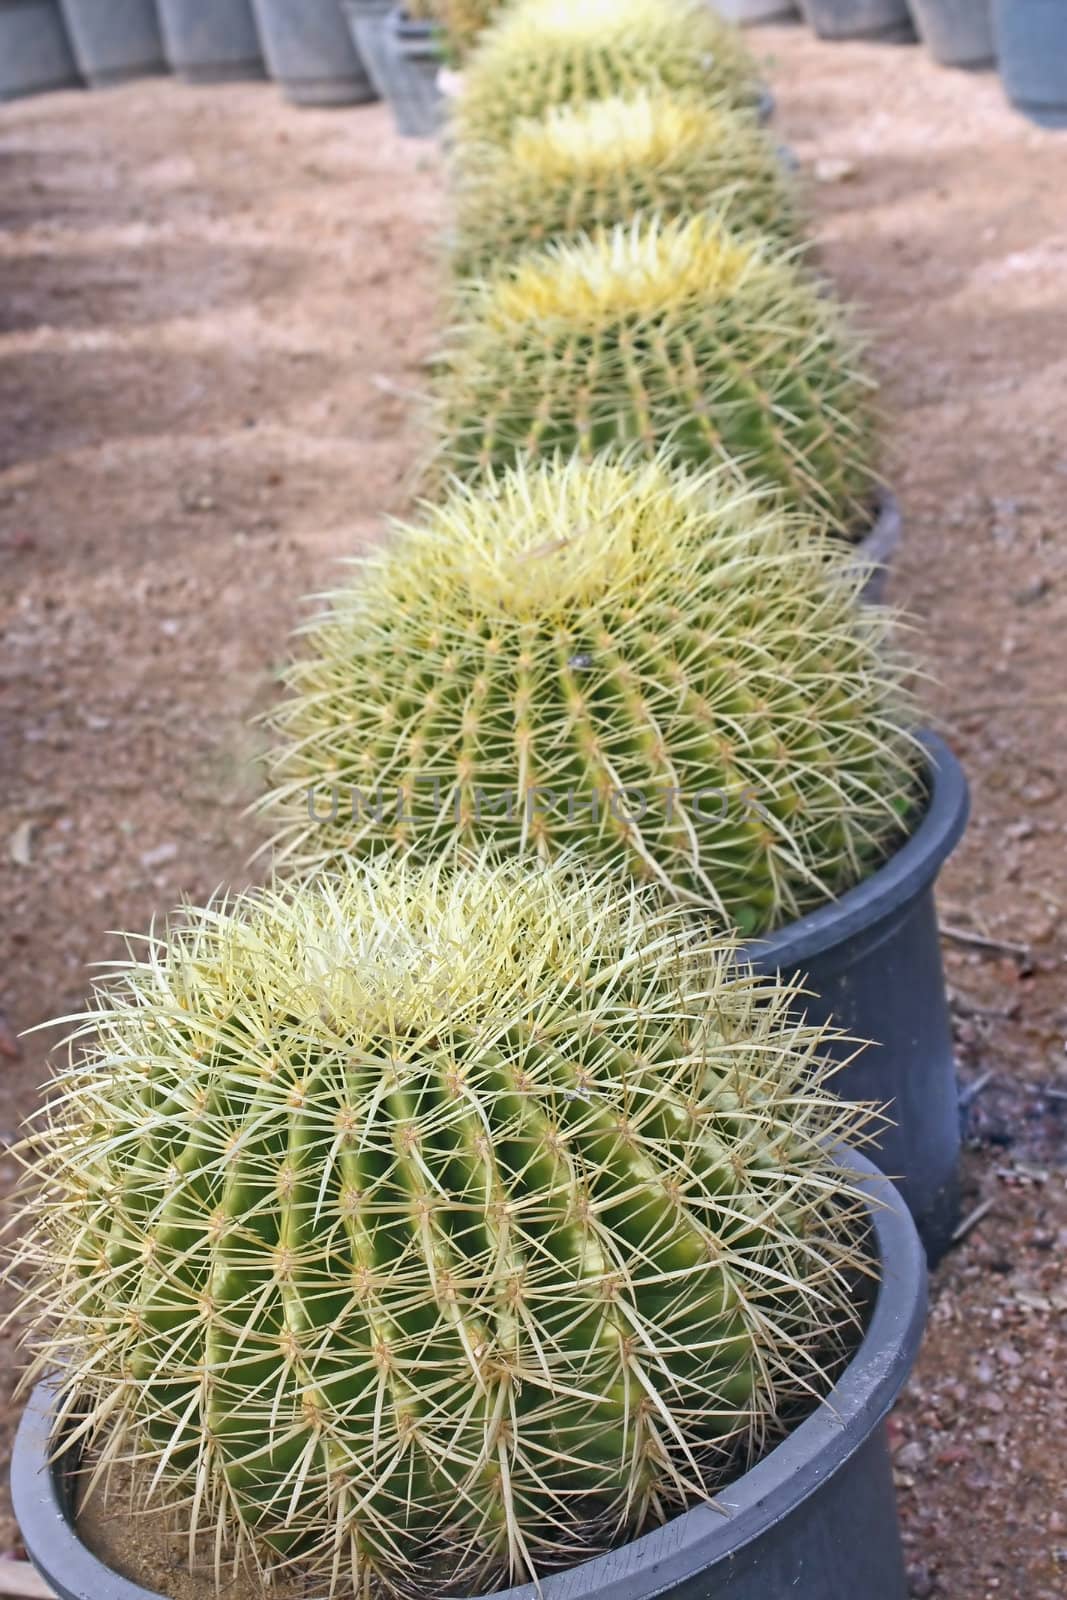 Cactuses grow in pots. Pots stand numbers.